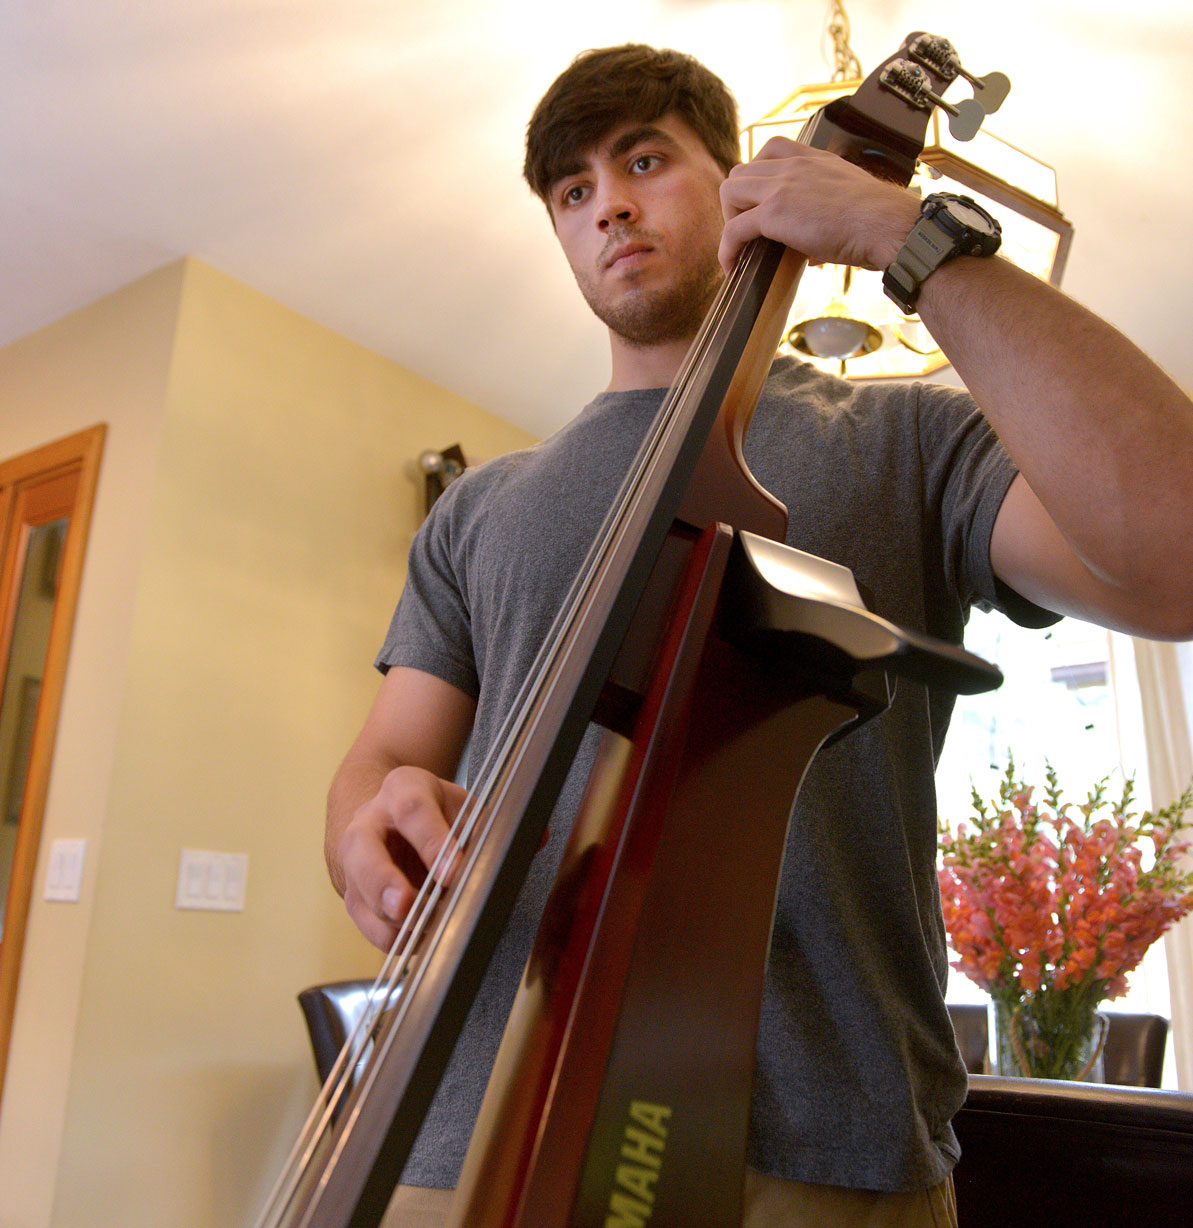 David Dubchak plays upright bass in the family band.  